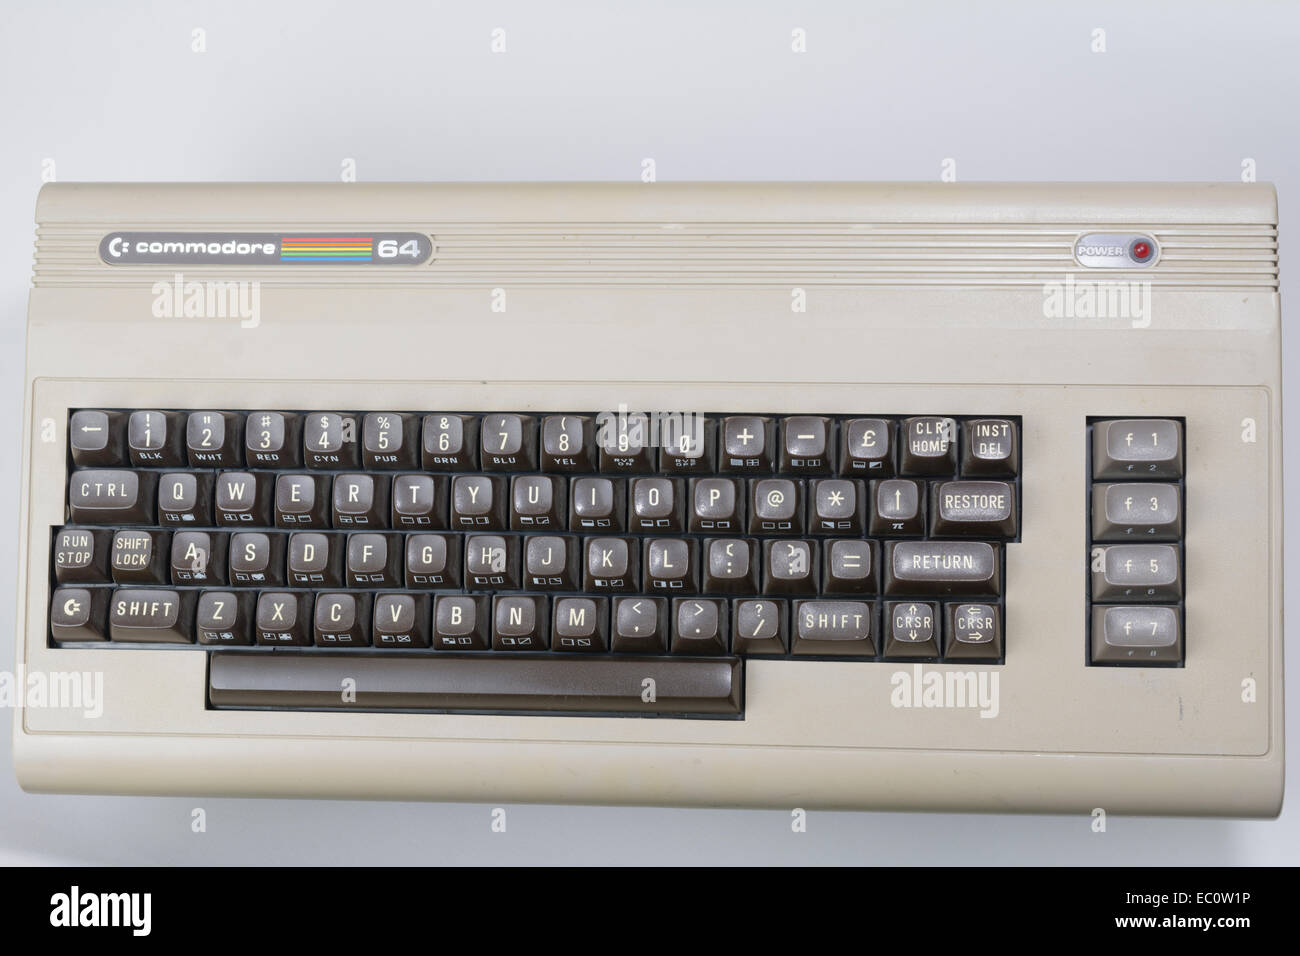 Commodore Keyboard High Resolution Stock Photography and Images - Alamy